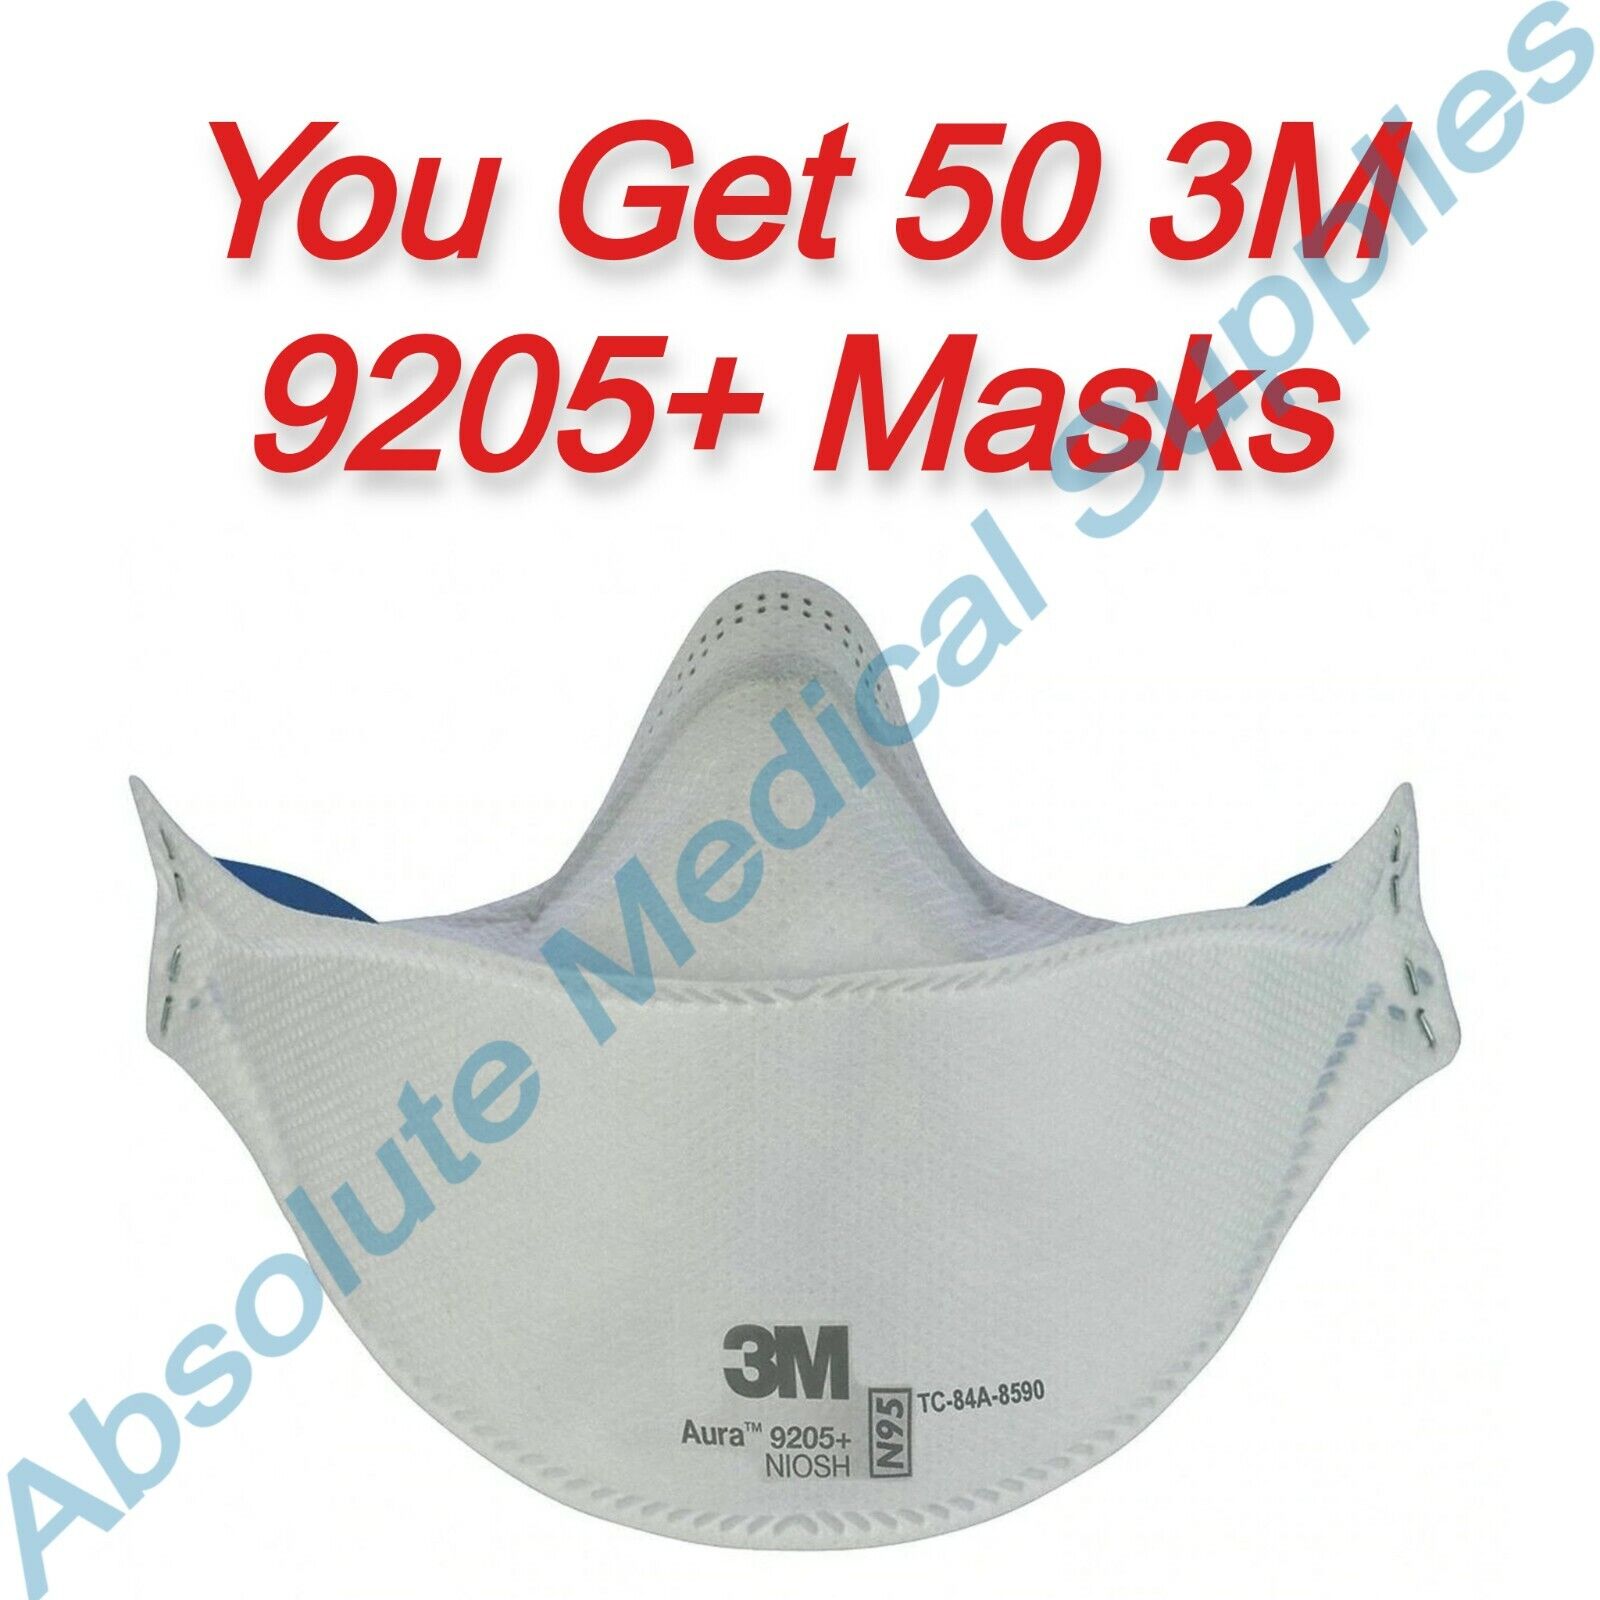 *50-Pack* 3M Aura N95 Protective Disposable Respirator Face Mask 9205+ 3M 9205+ 9205